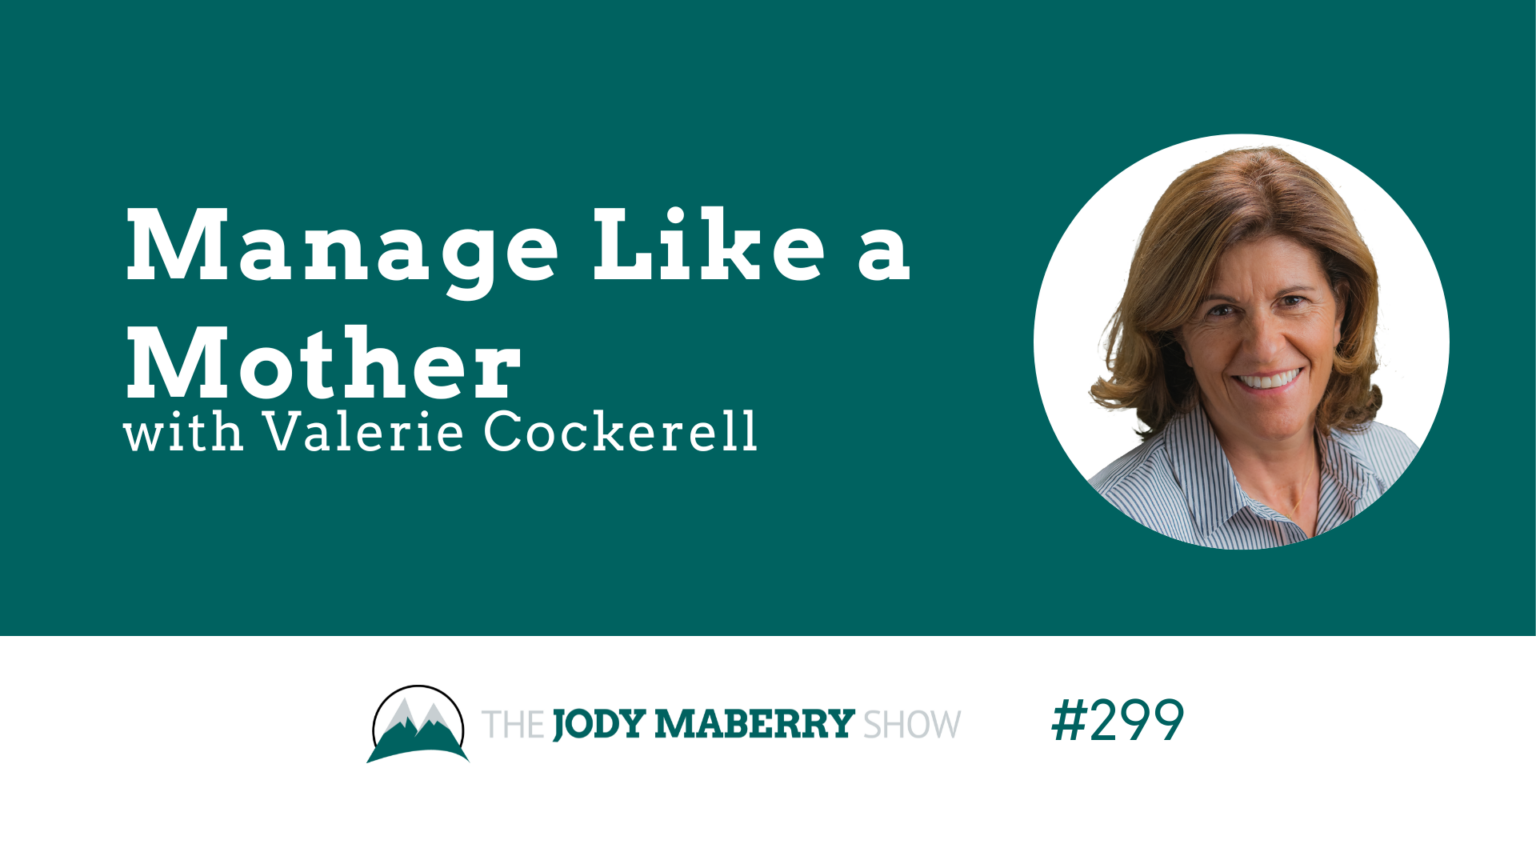 Jody Maberry Show Episode 299 Manage Like a Mother